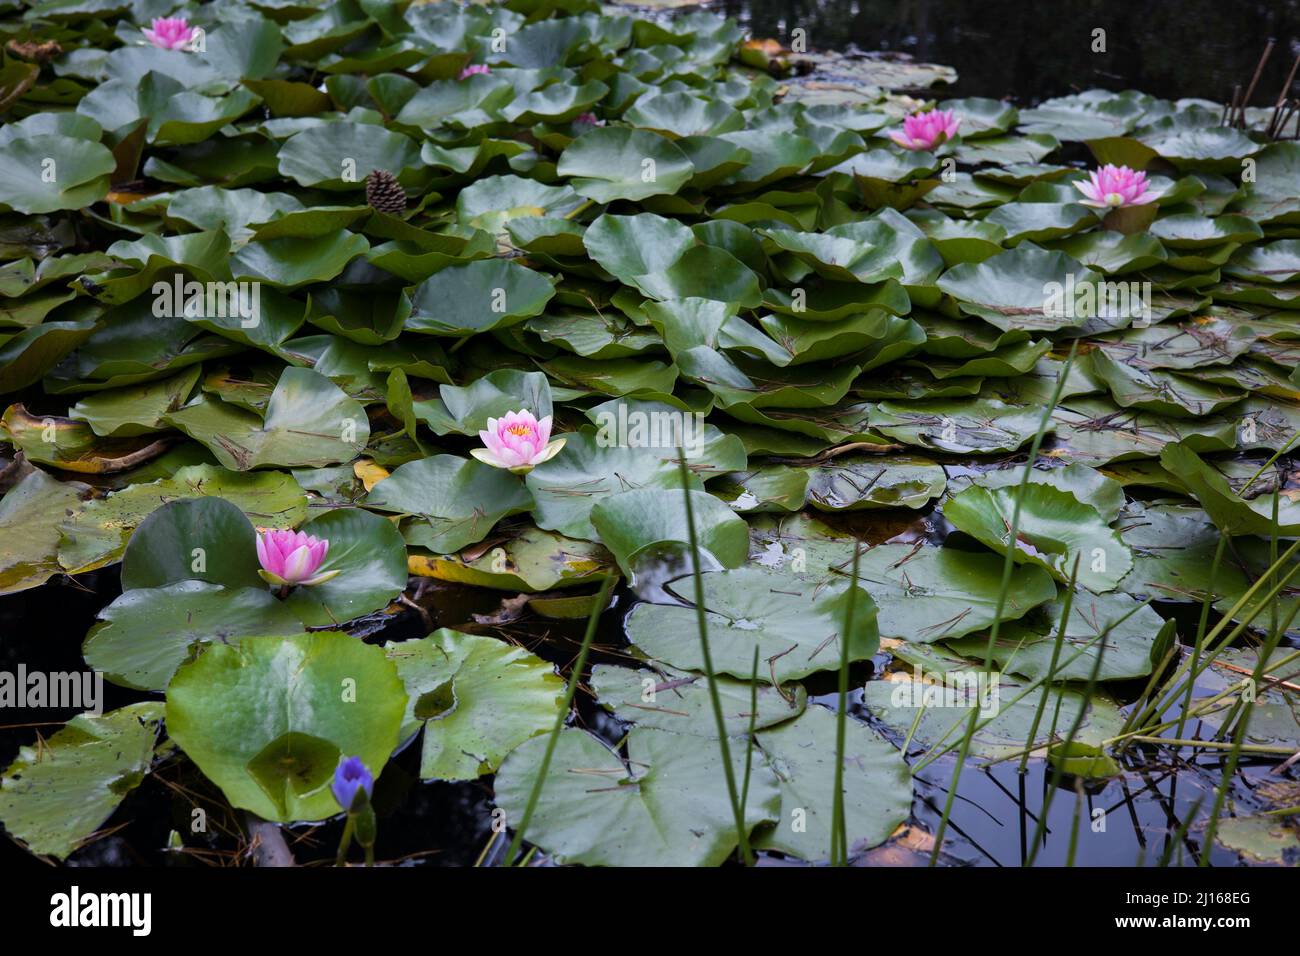 A pond filled with pink water lilies and their large green leaves Stock Photo